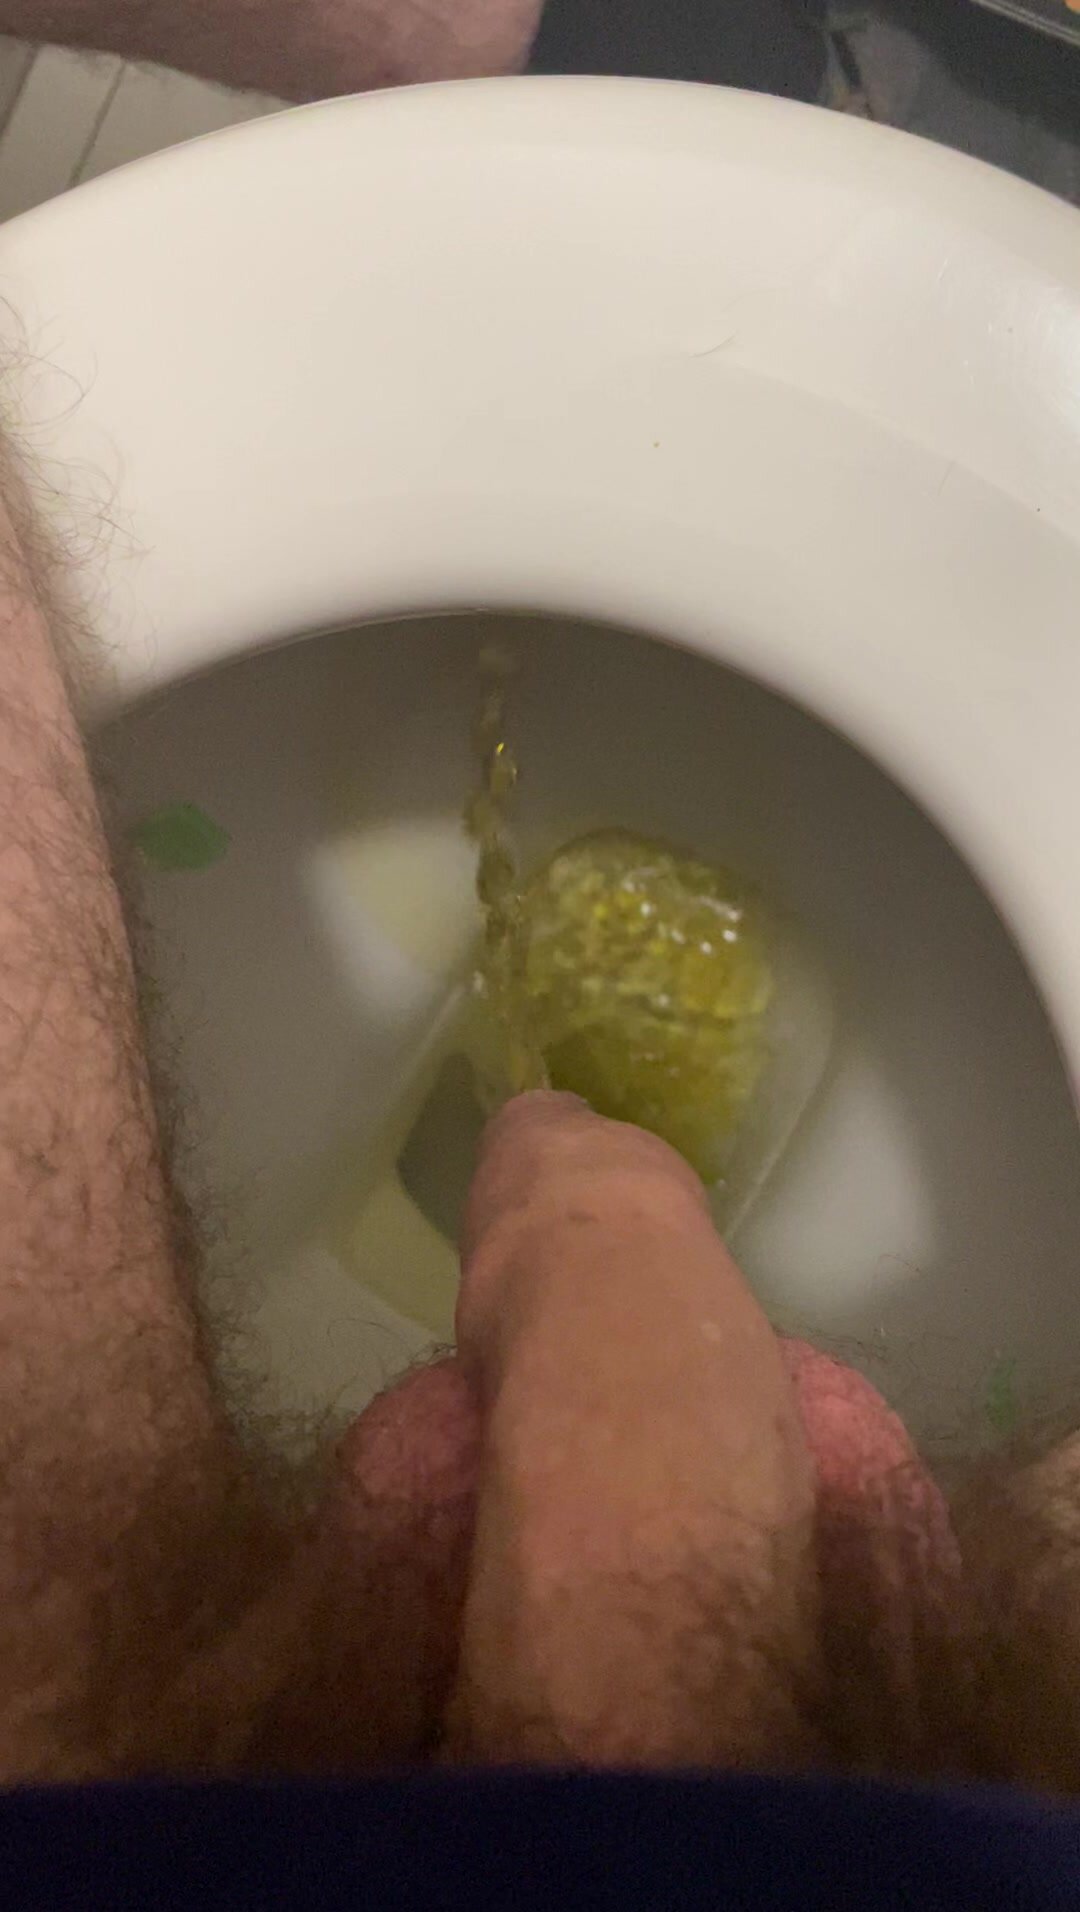 Aussie pissing in the toilet with a smelly dick!